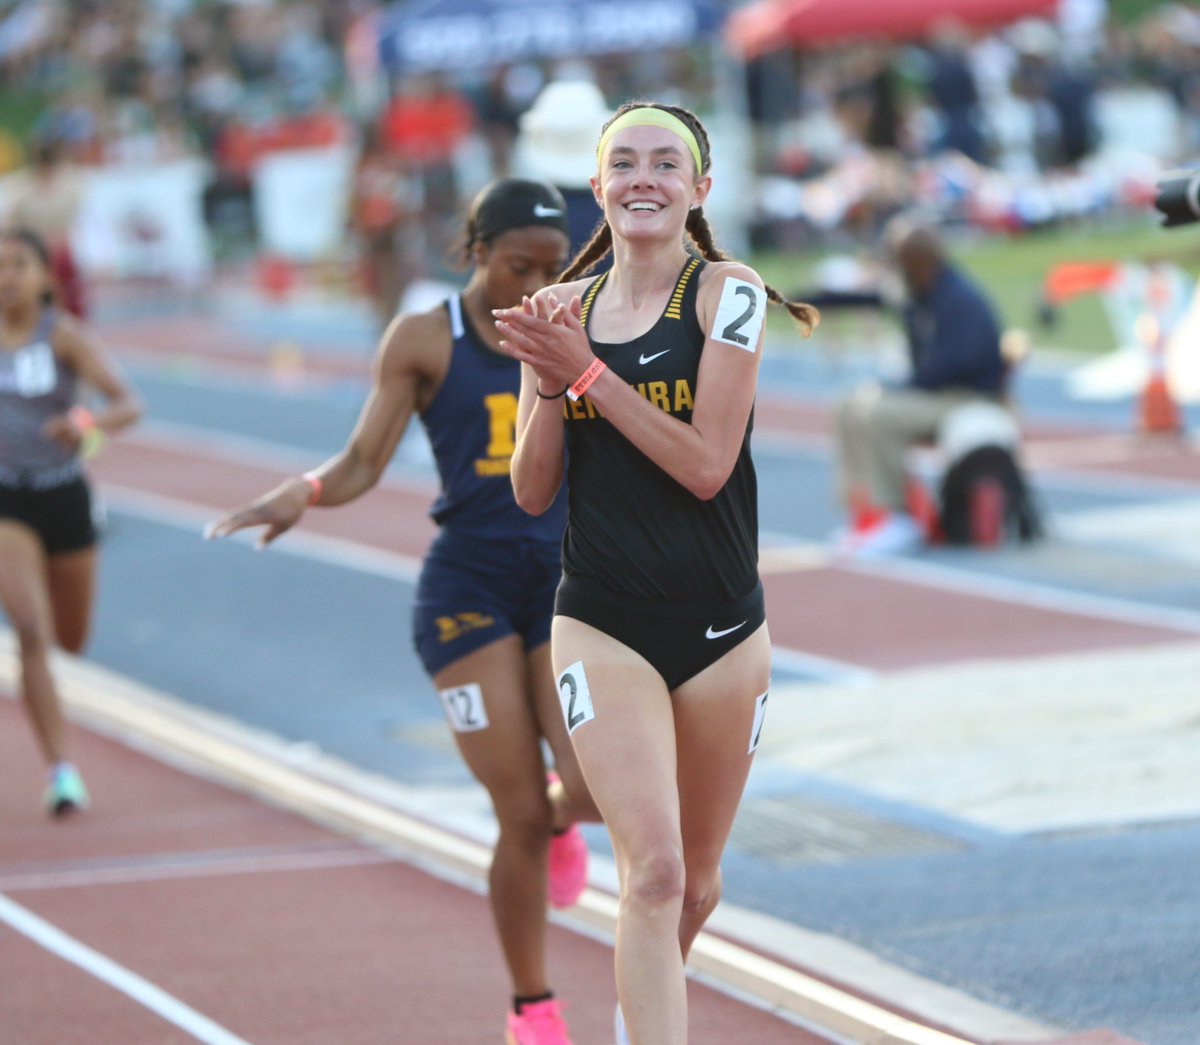 Sadie Engelhardt of Ventura becomes the second girl in California State Meet history to win both the 1600 and 800 as she ran 2:07.22